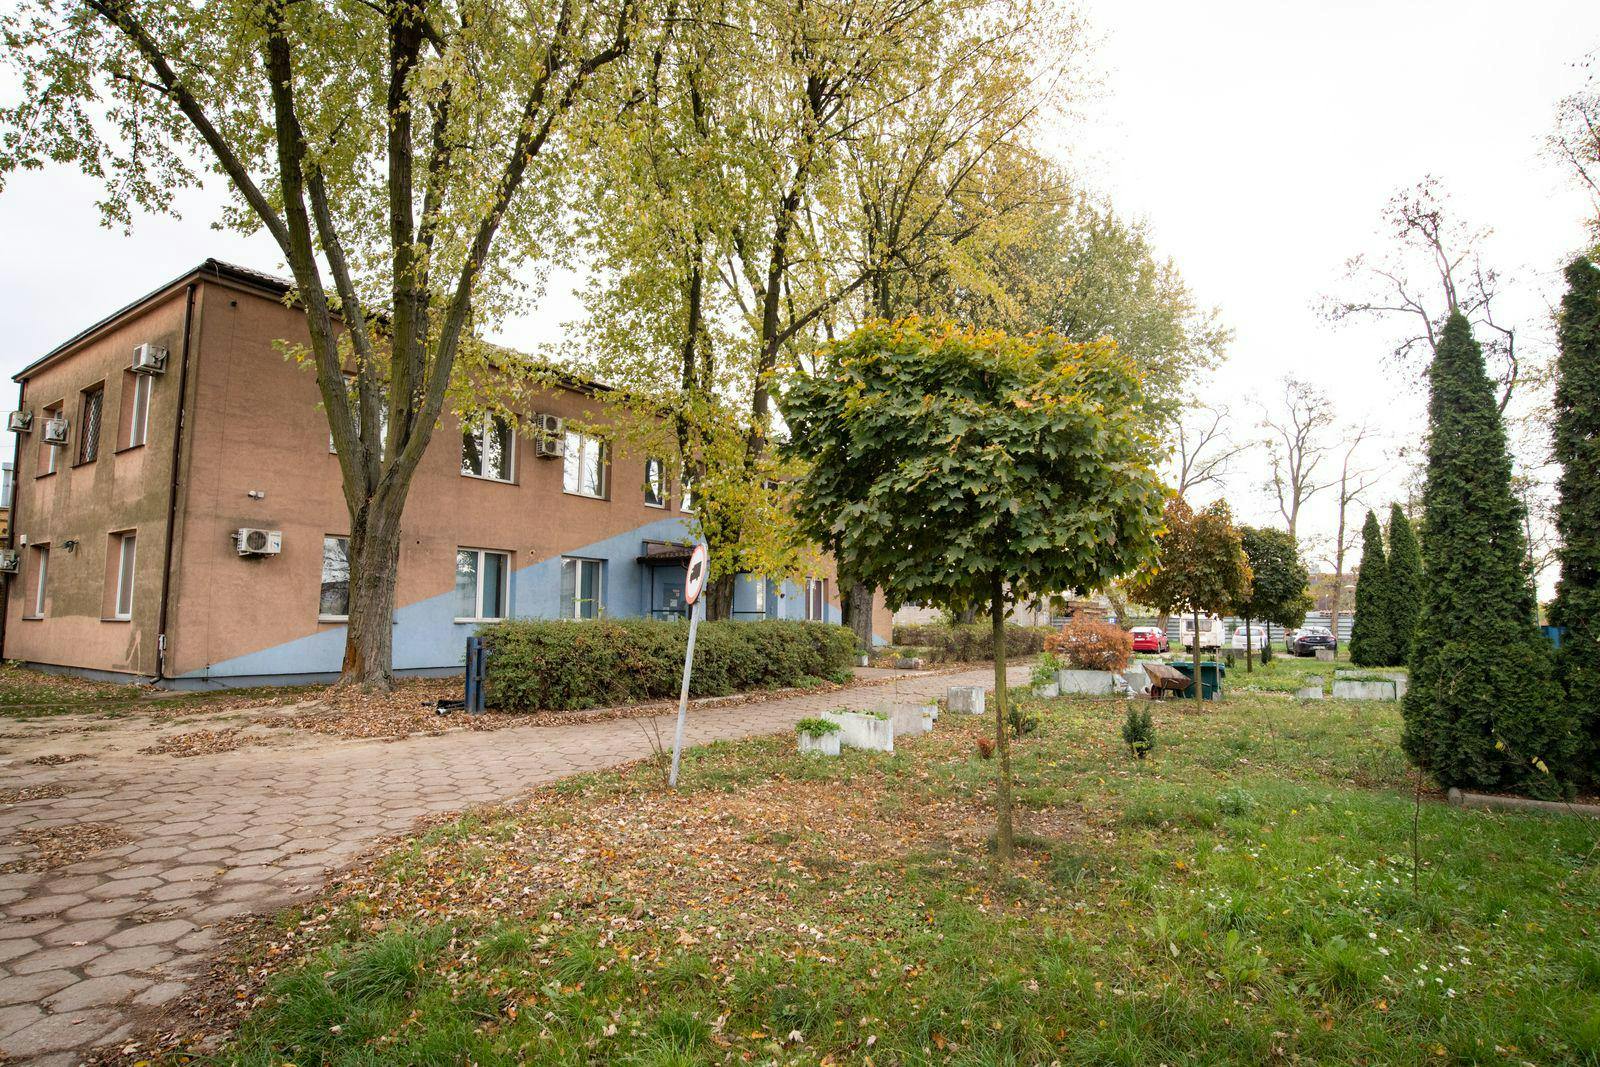 Offices for rent in Offices Kaczorowa 37 #3